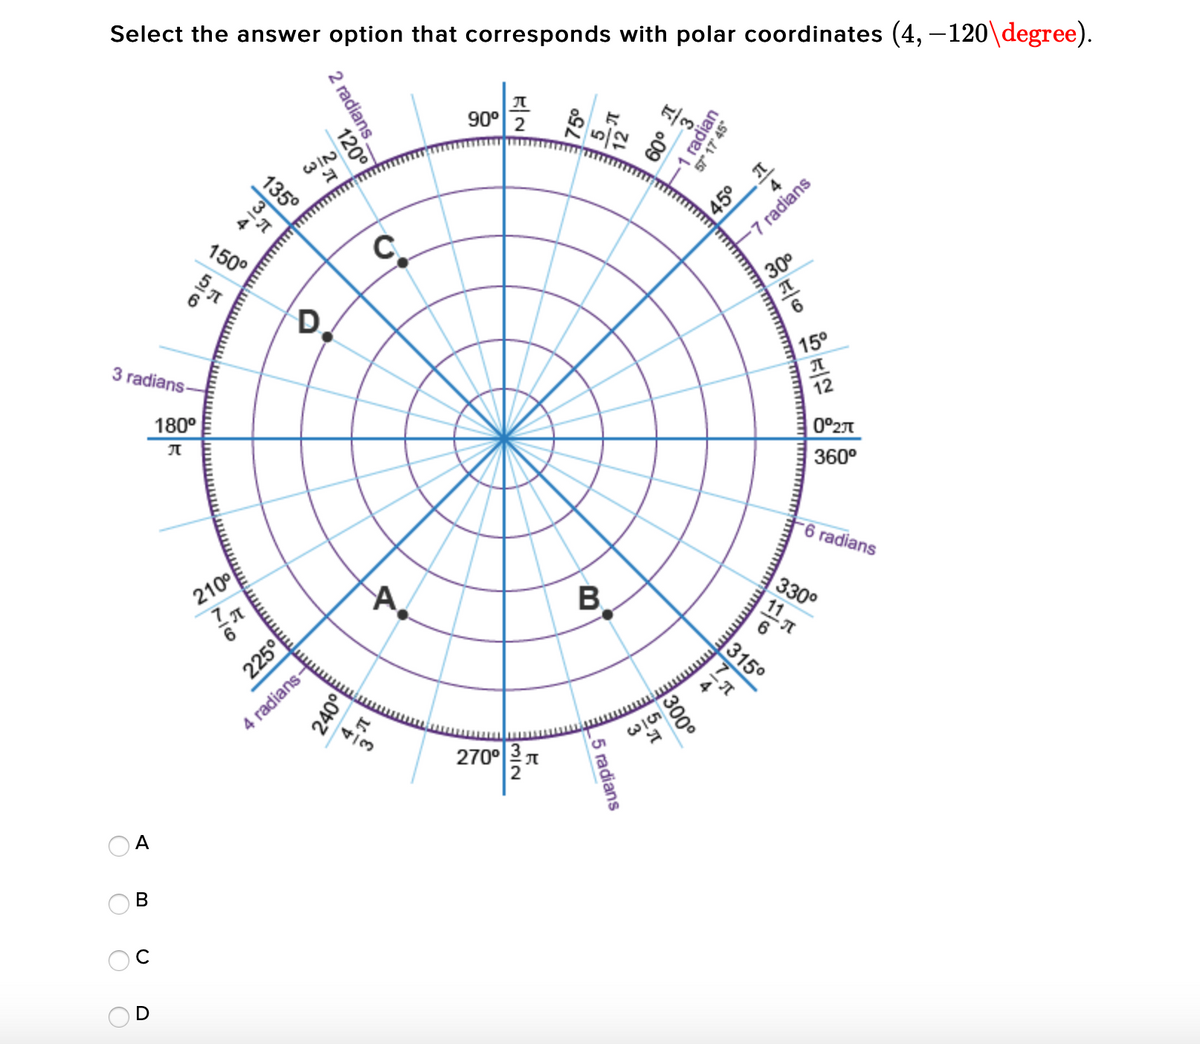 Select the answer option that corresponds with polar coordinates (4, –120\degree).
90°
WIN
45° T
4
7 radians
150°
C.
D
30°
3 radians-
180°
15°
12
0°27T
360°
210°
-6 radians
6
330°
11 元
315°
4 radians-
2700지
A
В
C
D
57* 17' 45°
2 radians
120
135°
B,
300°
_5 radians
225°
240이
